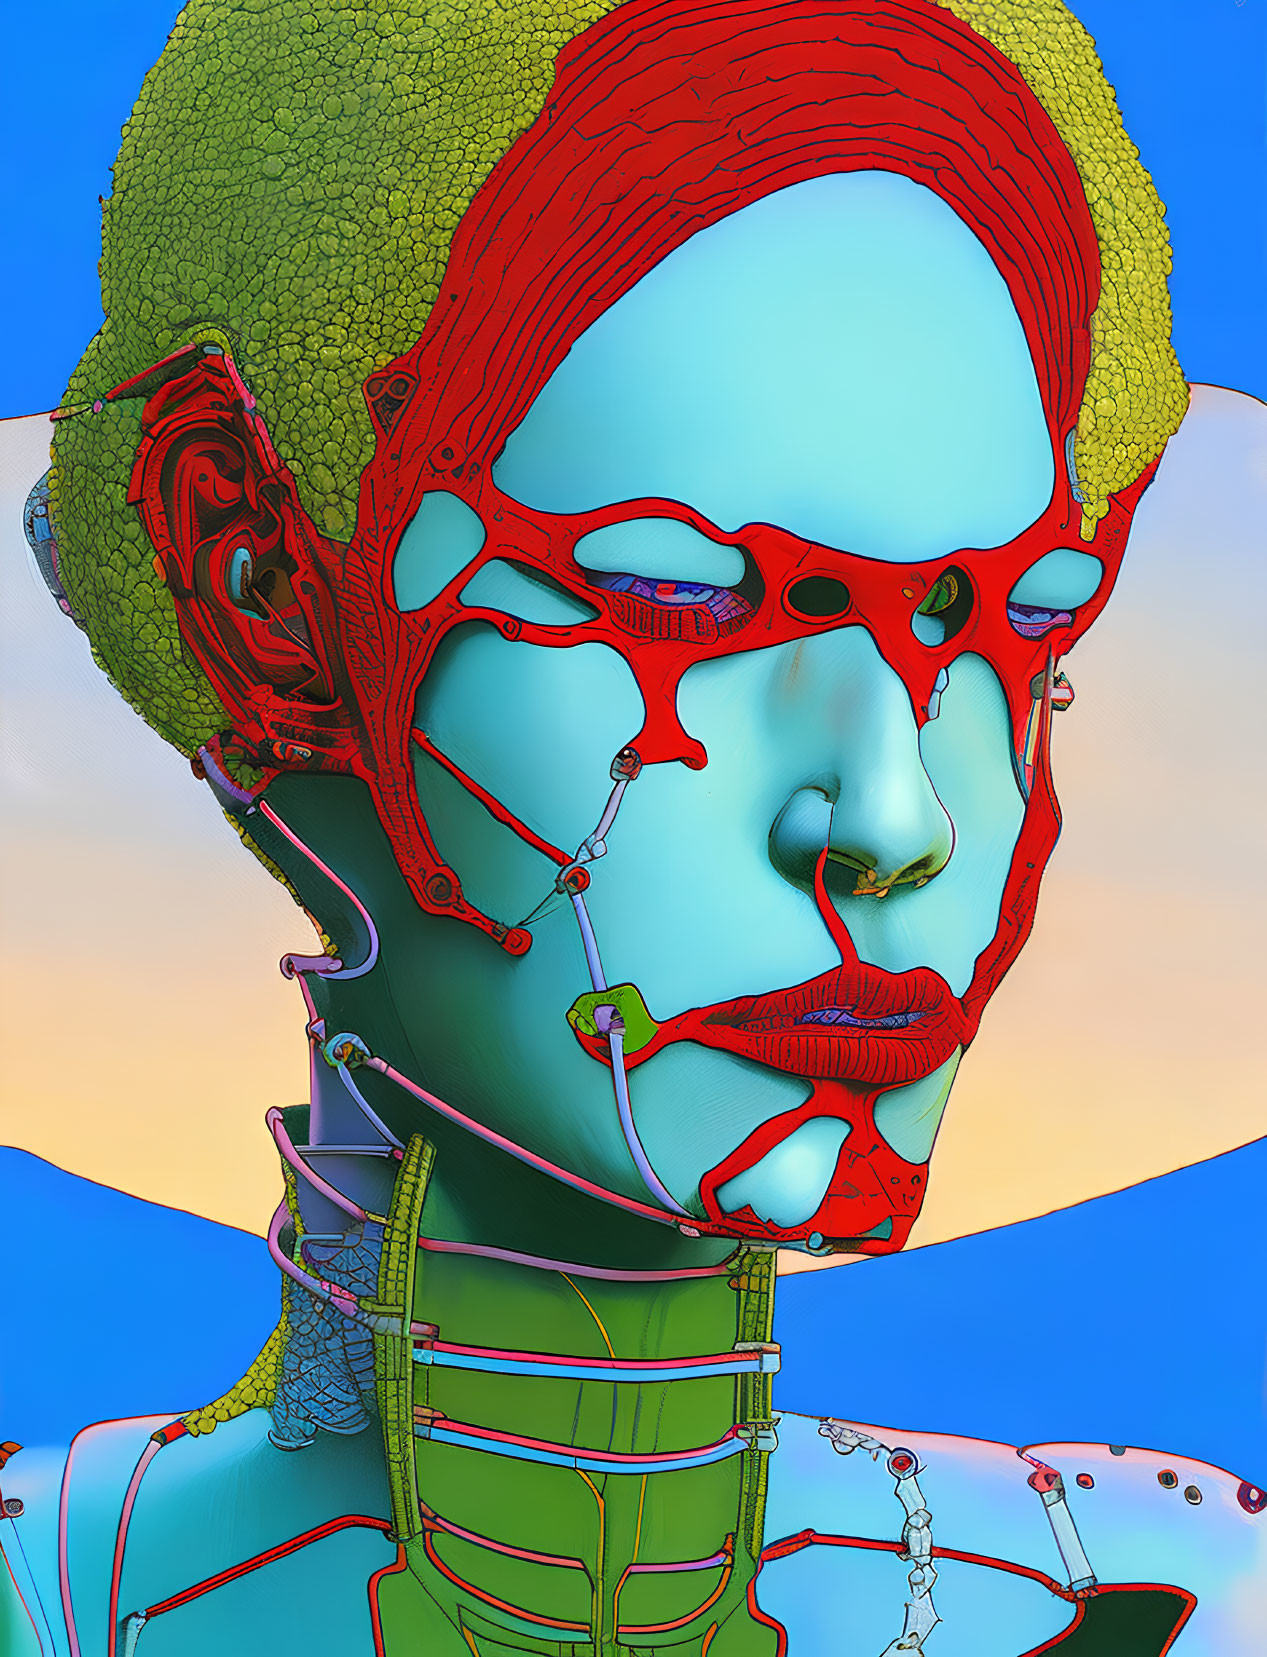 Colorful Digital Artwork: Humanoid Figure with Cybernetic Features on Blue and Orange Background